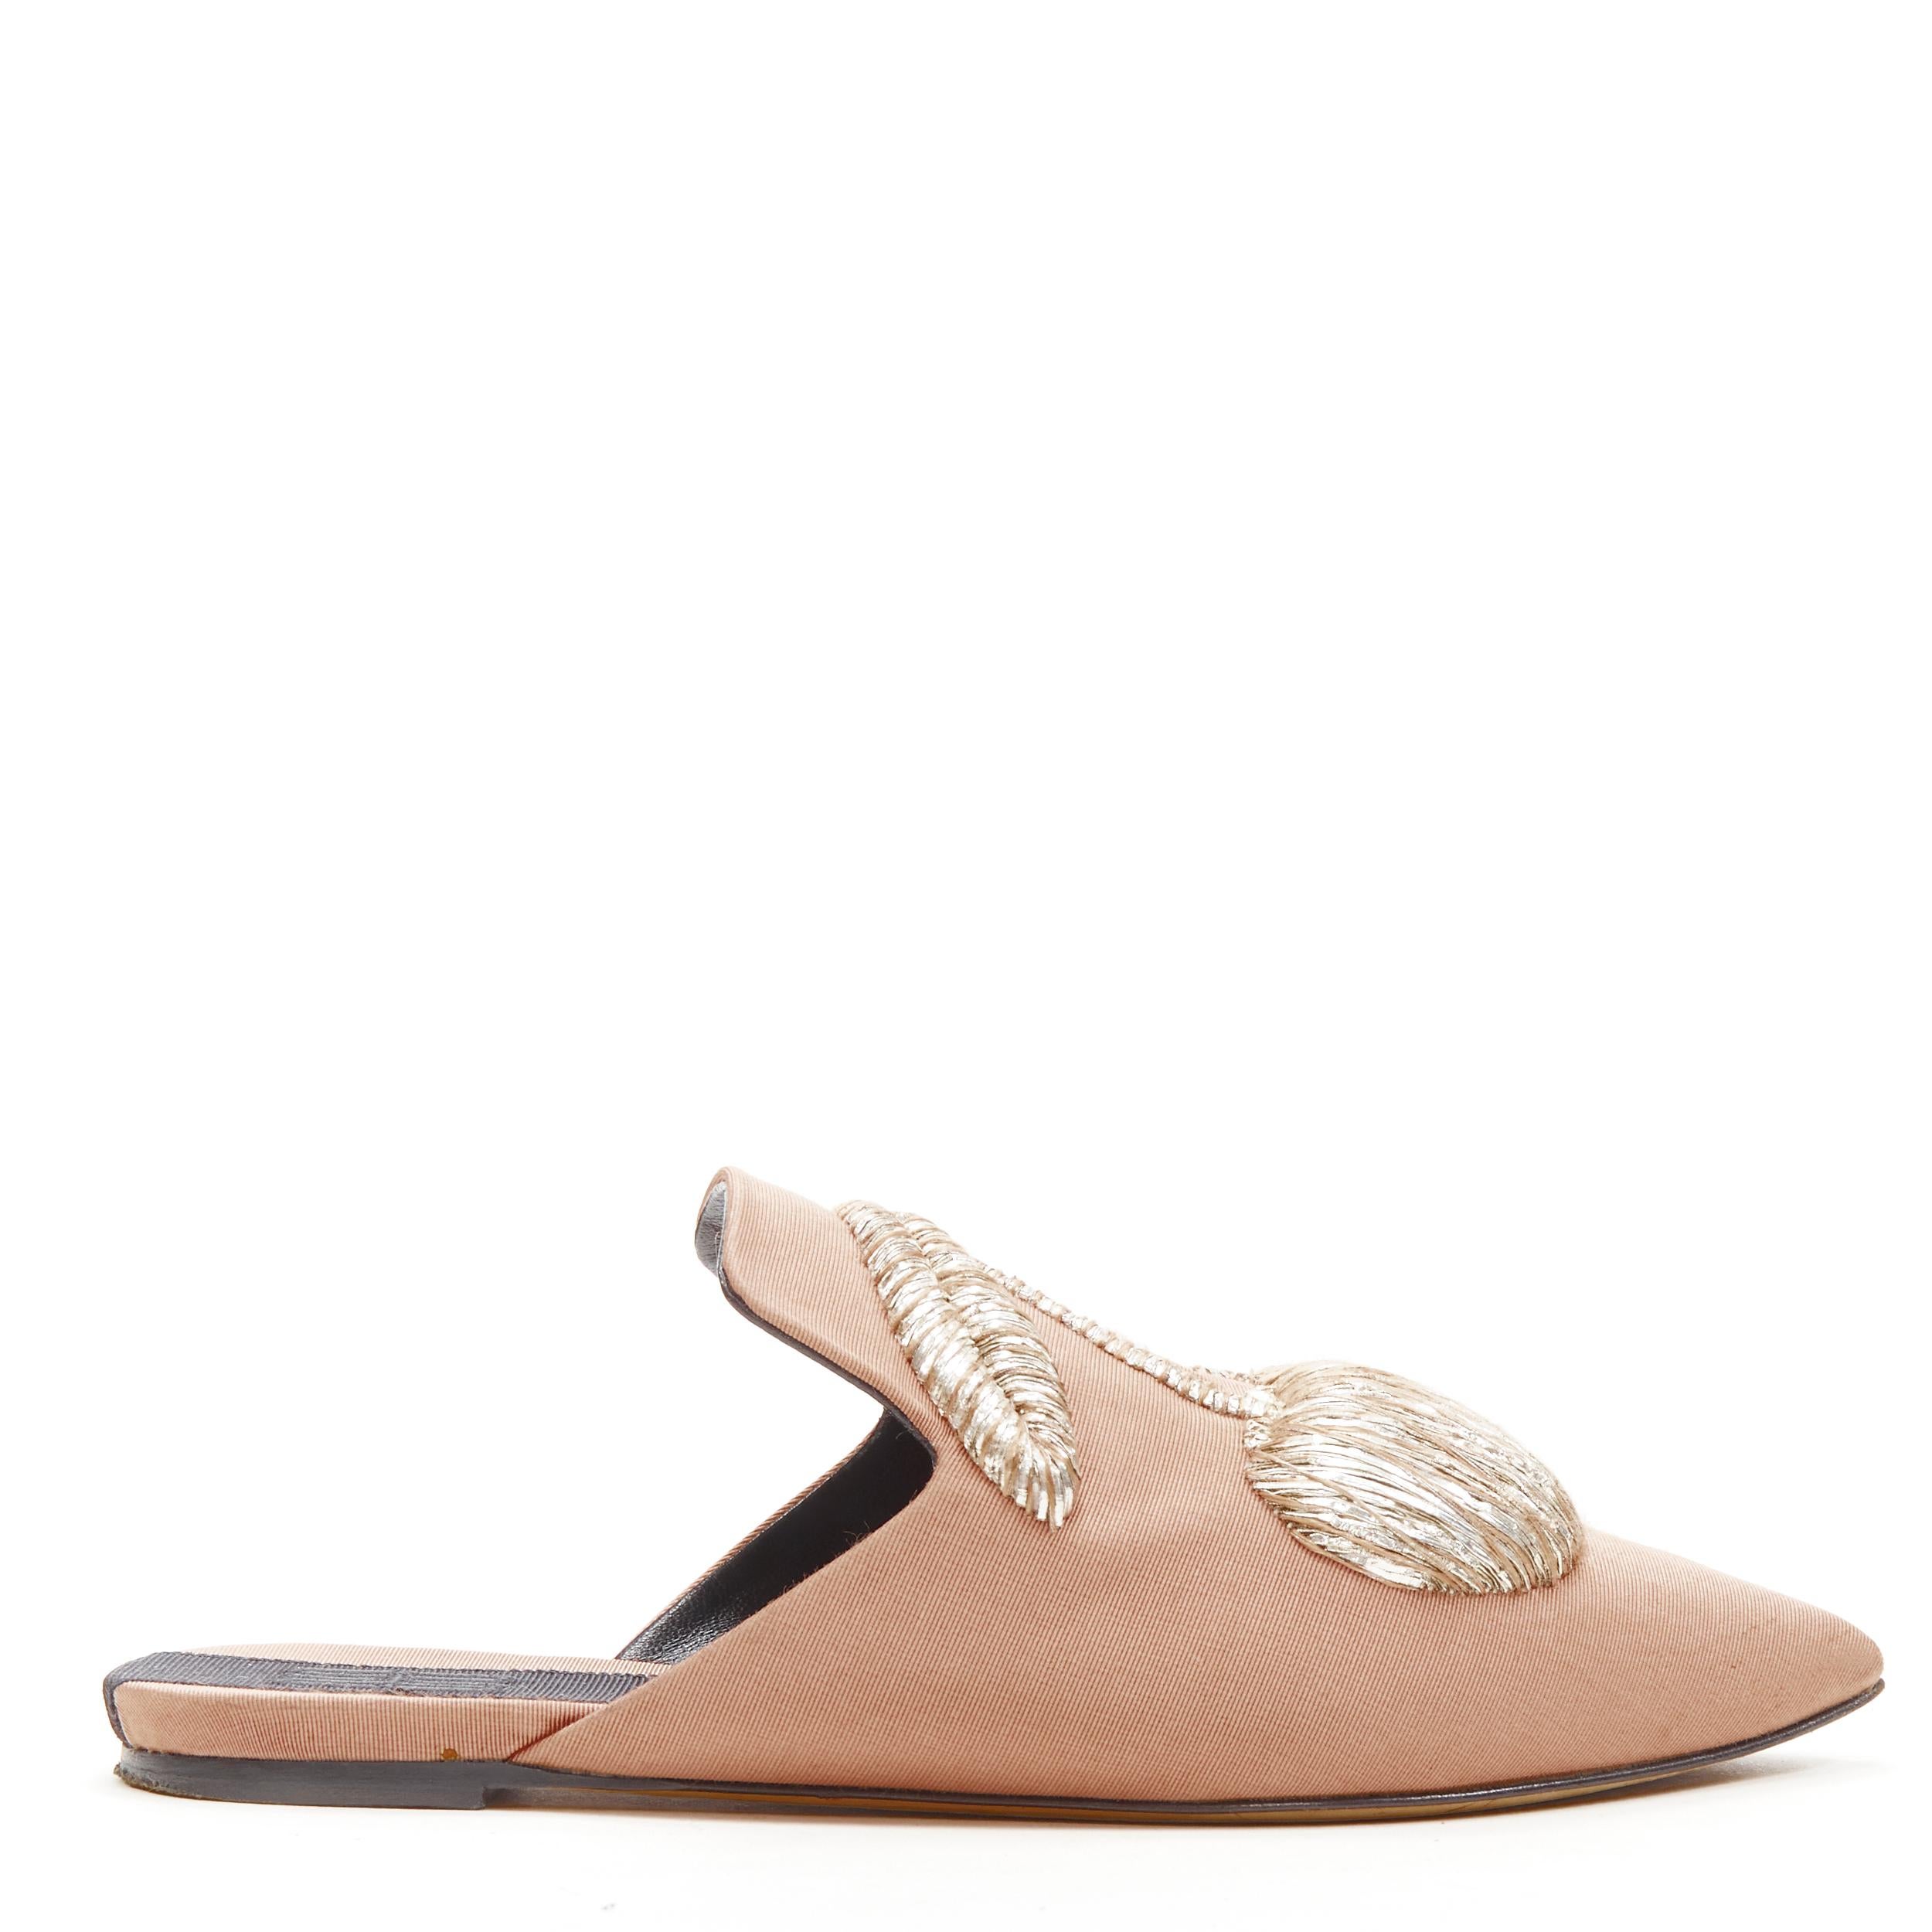 SANAYI 313 beige silver fabric embroidery slip on babouche slippers EU36 
Reference: ANWU/A00181 
Brand: Sanayi 313 
Material: Fabric 
Color: Beige 
Pattern: Solid 
Extra Detail: 3D cherry embroidery. 
Made in: Italy 


CONDITION:
Condition: Good,